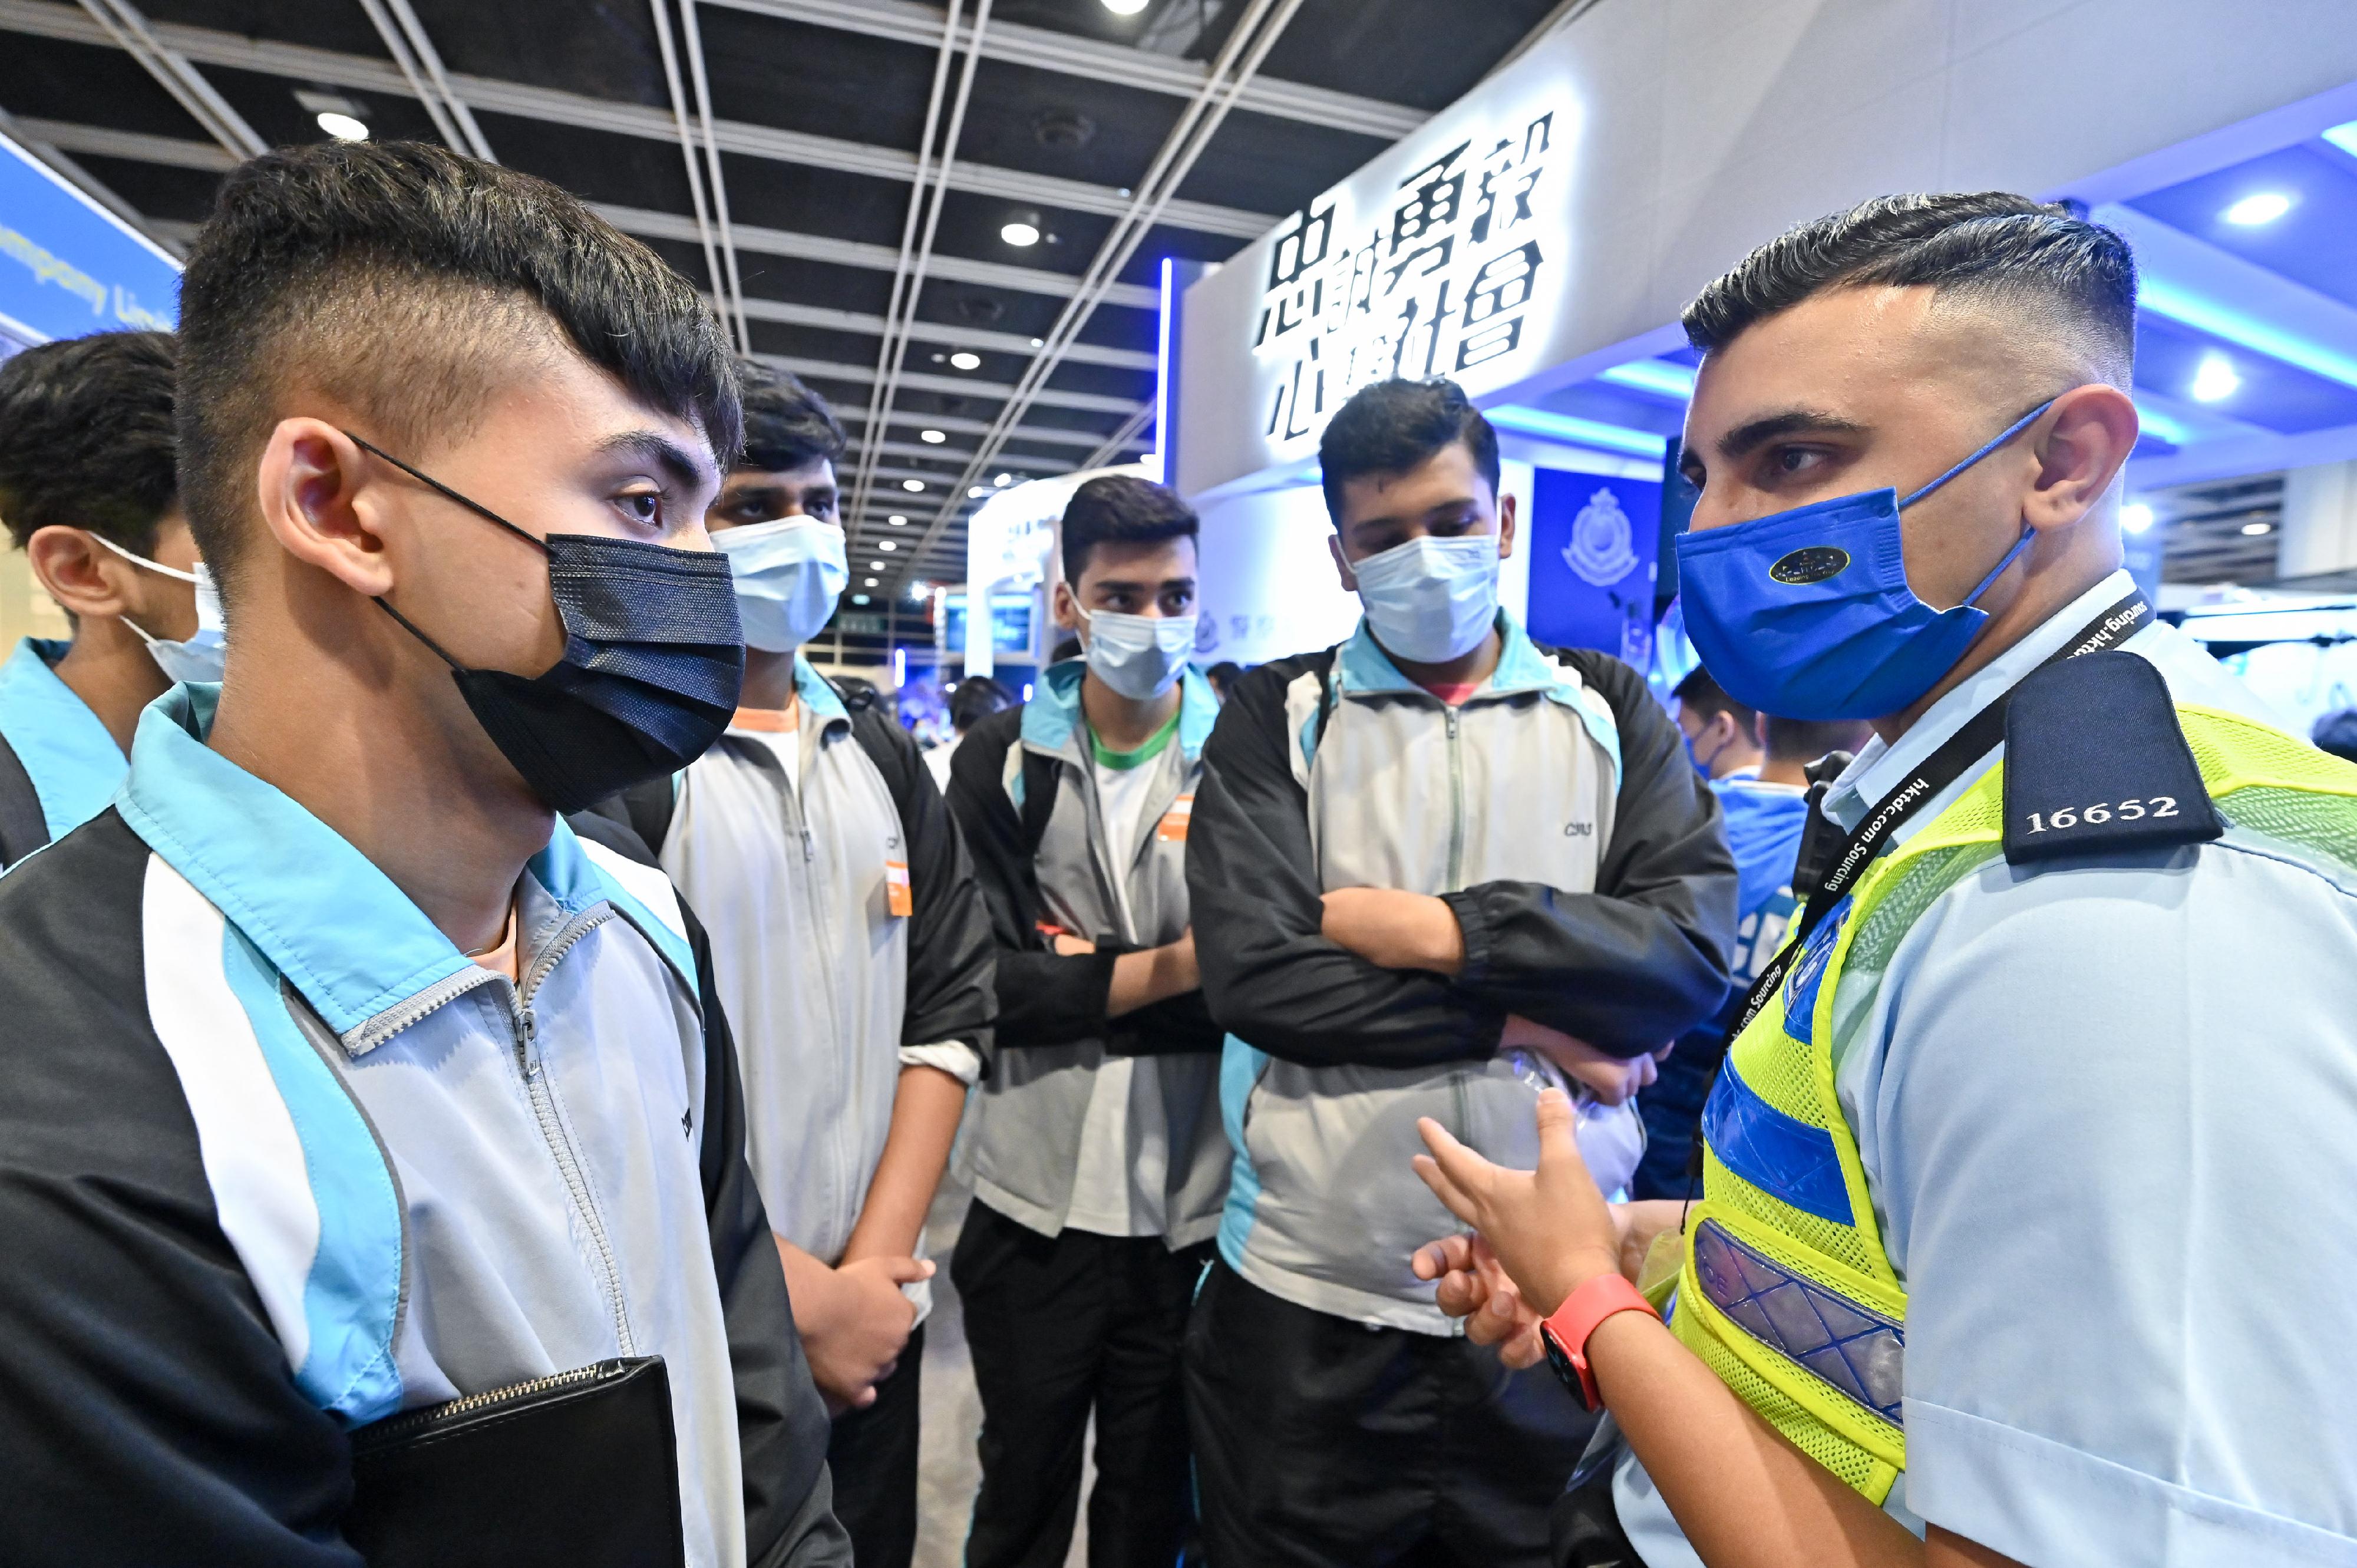 The Police Force introduces its work and provides recruitment information to visitors at the four-day Education and Careers Expo 2022 starting today (July 21). Photo shows a non-ethnic Chinese officer introducing Police works to visitors.